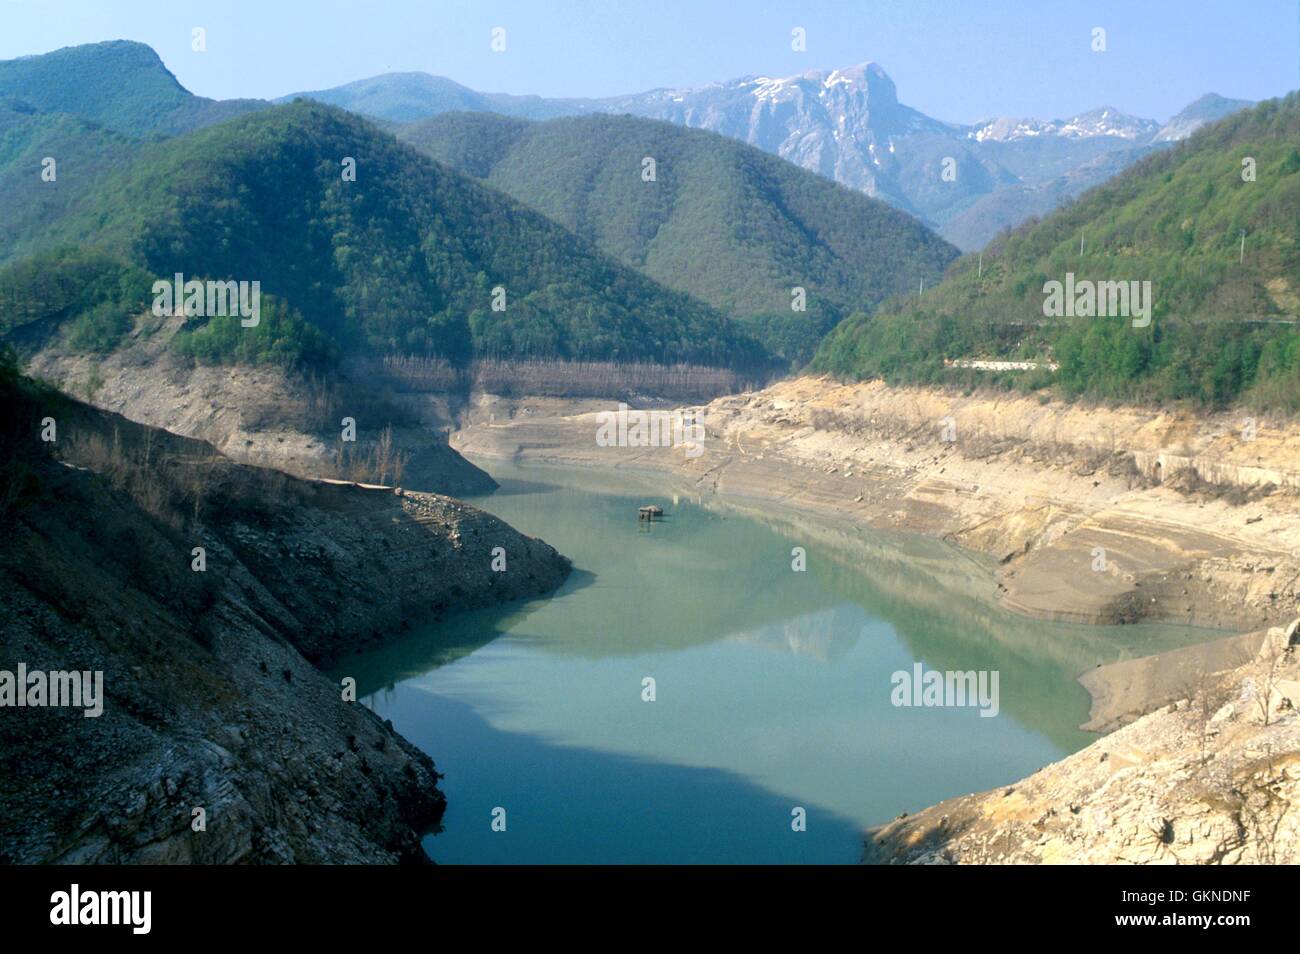 The ancient village Fabbriche di Careggine (Garfagnana Valley, Tuscany, Italy), submerged by the waters of the lake Vagli, resurfaces each ten years in occasion of maintenance to the dam that blocks the lake. Stock Photo